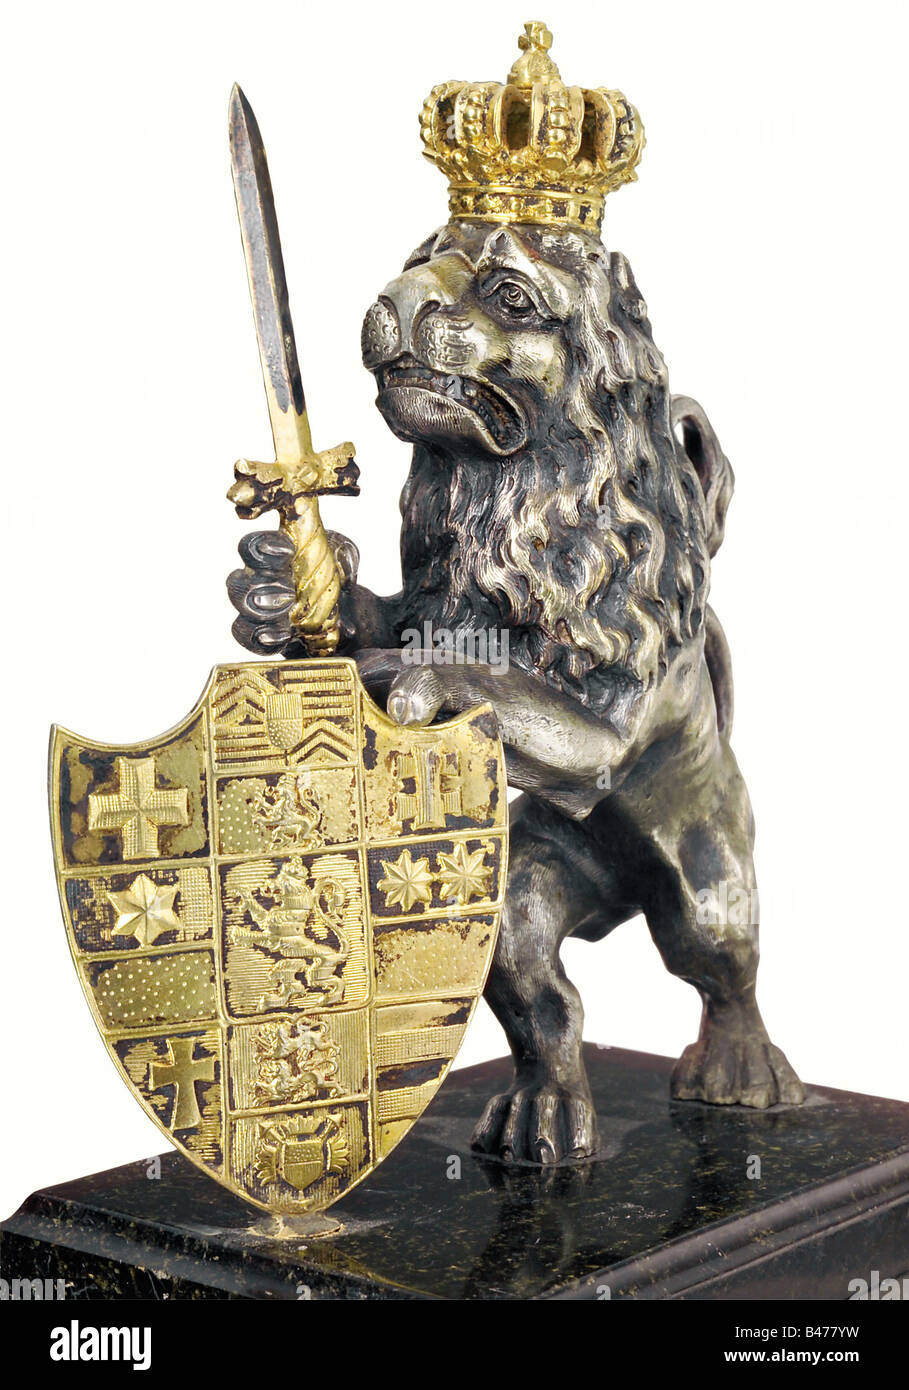 An officer's presentation gift, Fusilier Regiment von Gersdorff (Hessian Electorate) No. 80. A rampant silver lion with a gold plated crown, sword and shield. The shield bears the coat of arms of the Electorate of Hesse. The shield is engraved on the back, 'In Happy Memory of your Service with the Regiment 30 October 1866-25 July 1875, and after 1 January 1901.' Metal parts tarnished. On a black marble base, with the silver regimental cipher on the front, and a dedication plate below, 'To their honoured regimental comrade, His Excellency, Generalleutnant z.D. (, Stock Photo